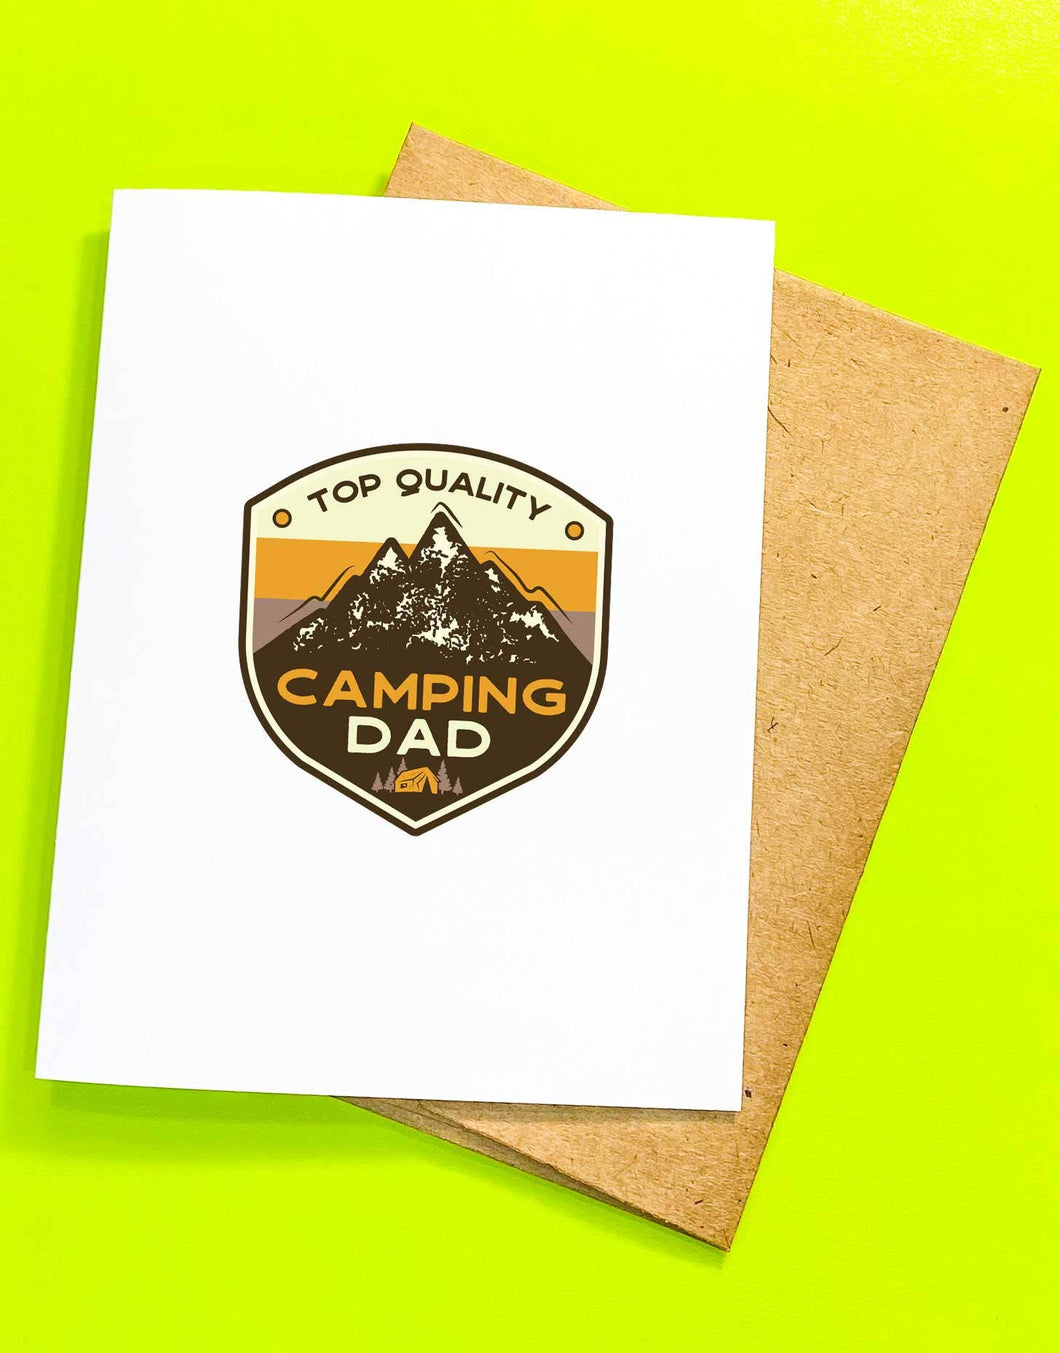 pArDon mY FrEnCh - Top Quality Camping Dad - Fathers Day Card